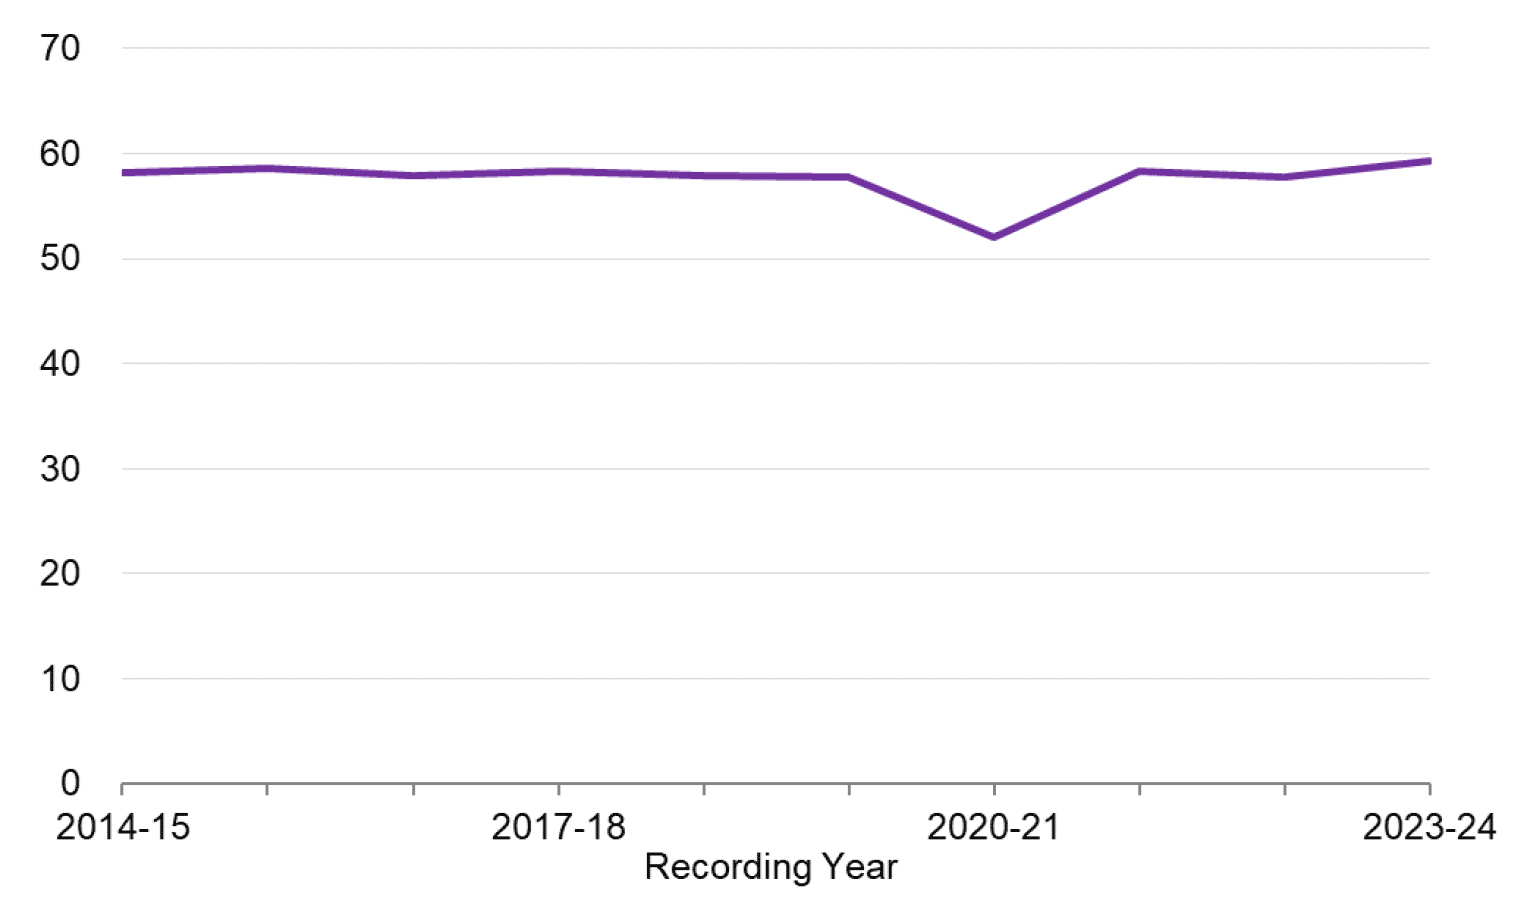 A line chart showing that Common assault has remained relatively stable over the last ten years despite a dip in 2020-21.